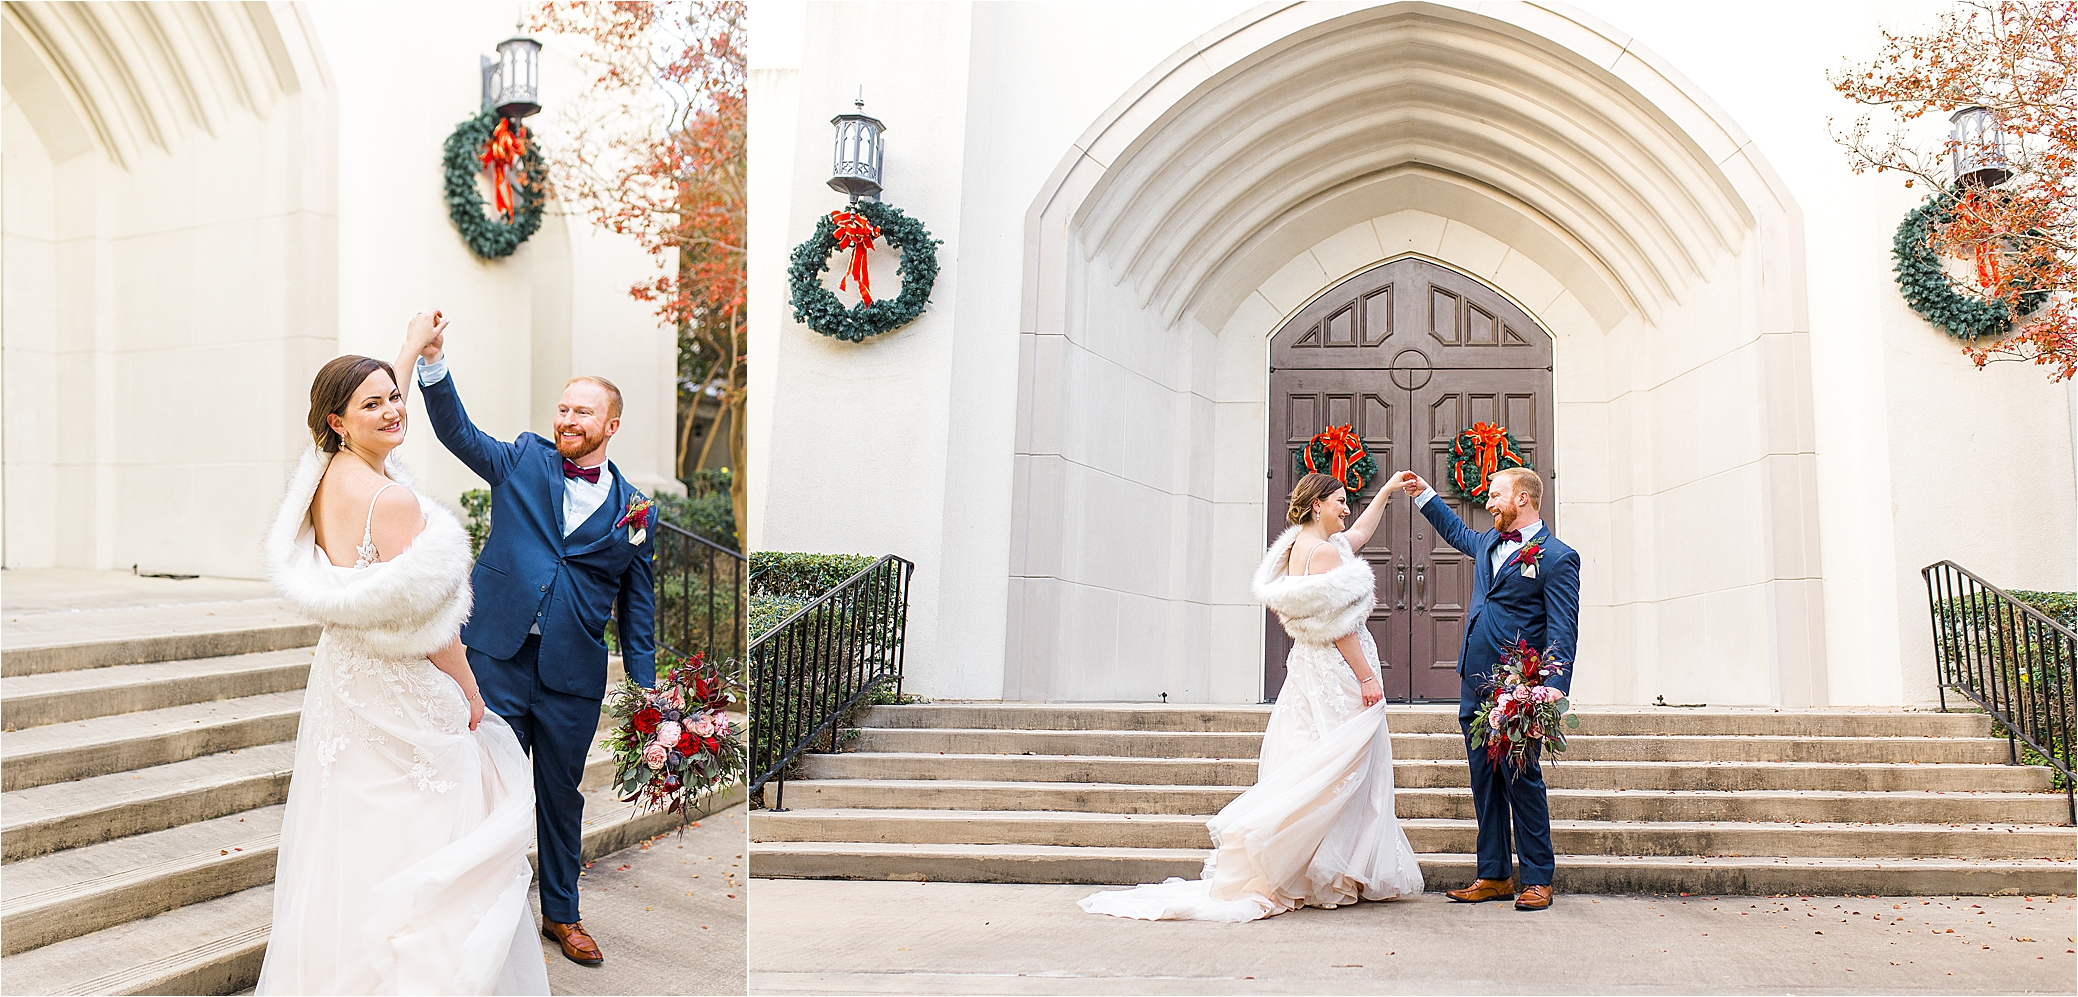 A groom in a navy suite spins his bride in a winter shawl in front of a large brown wooden door and beautiful arch at Alamo Heights United Methodist Church in San Antonio, Texas 